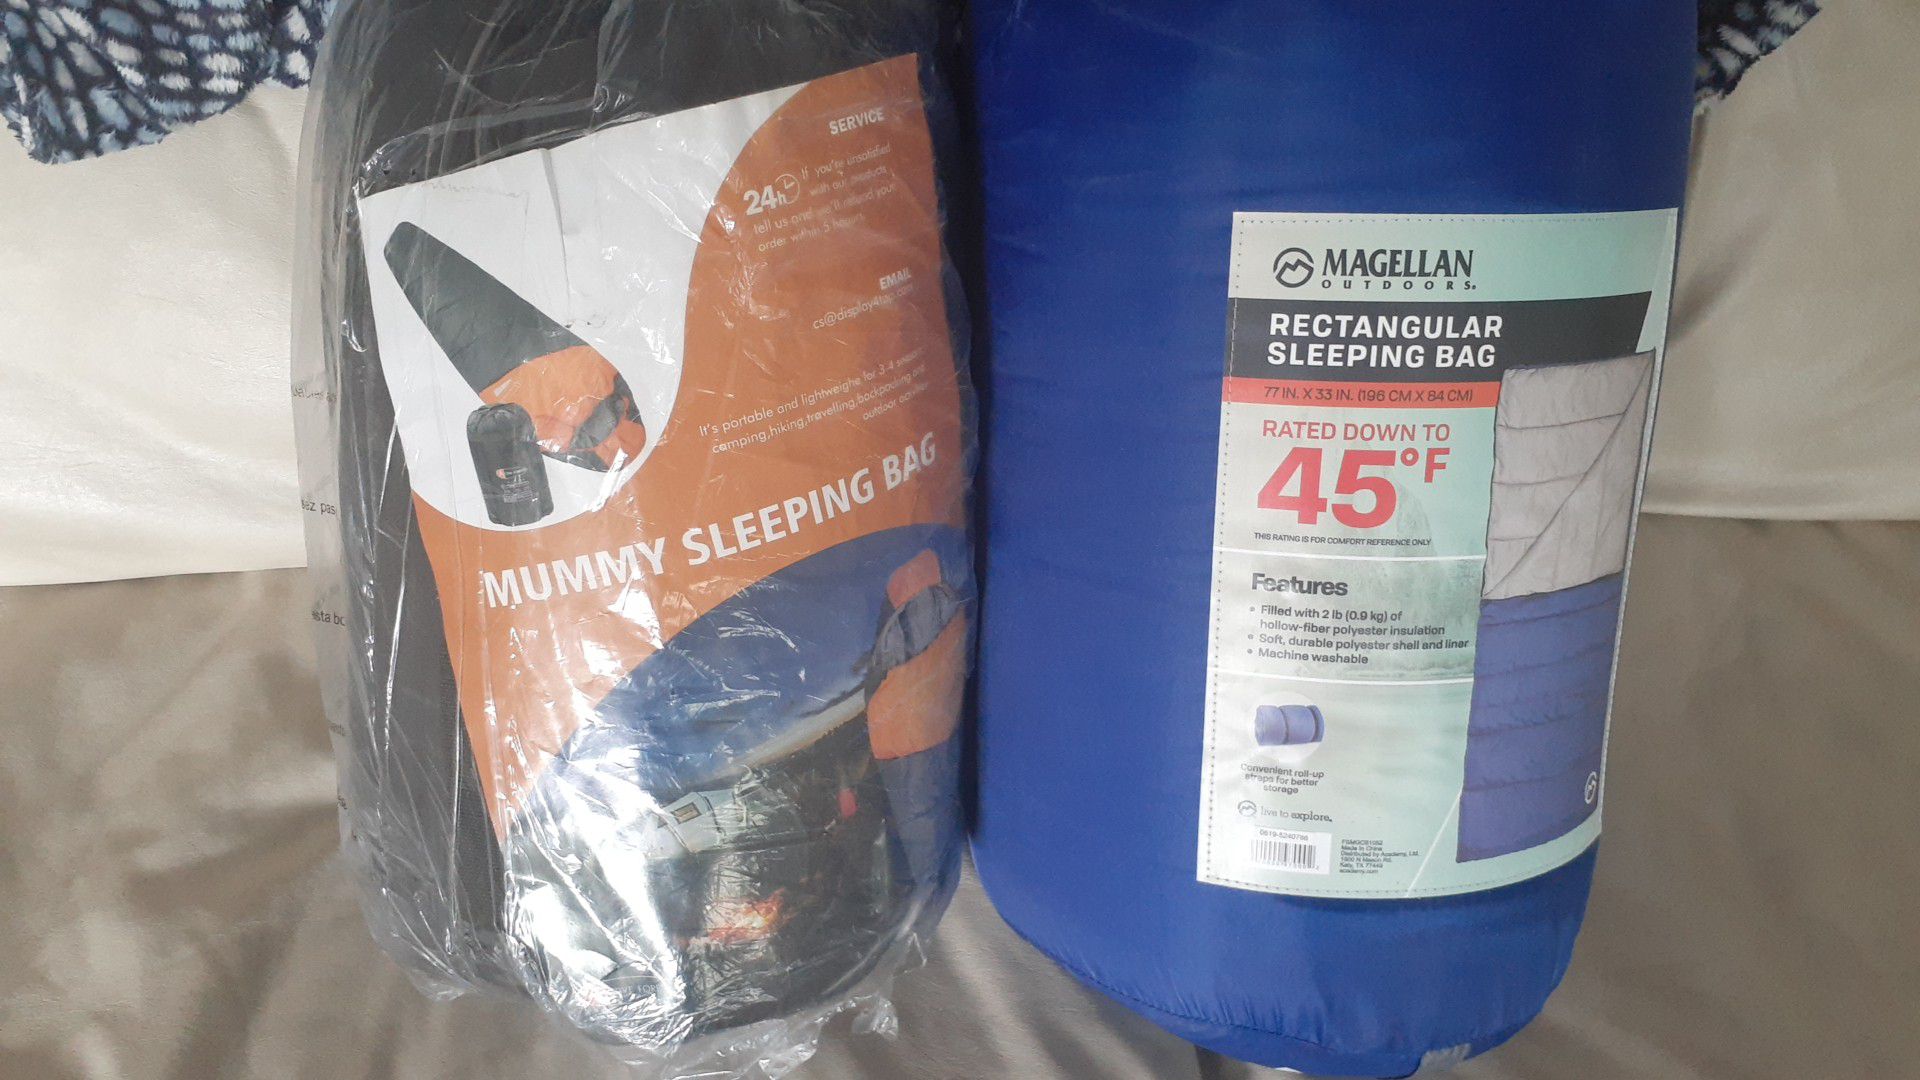 Brand New sleeping bags never been used